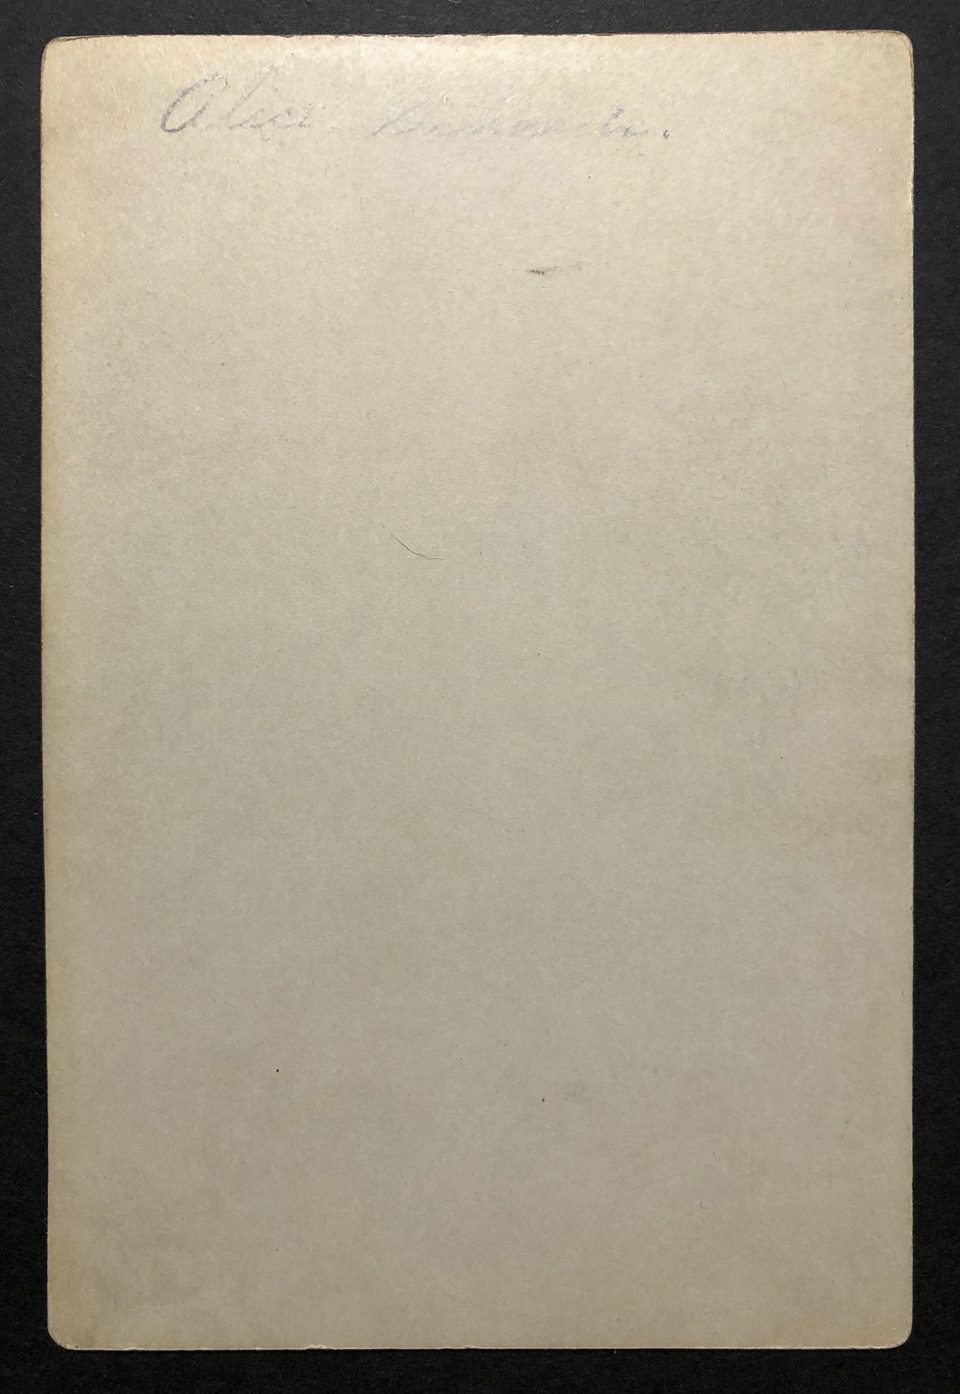 The blank back of the cabinet card features a faint name written in pencil that appears to say, "Alice Richards.," although it's very difficult read.